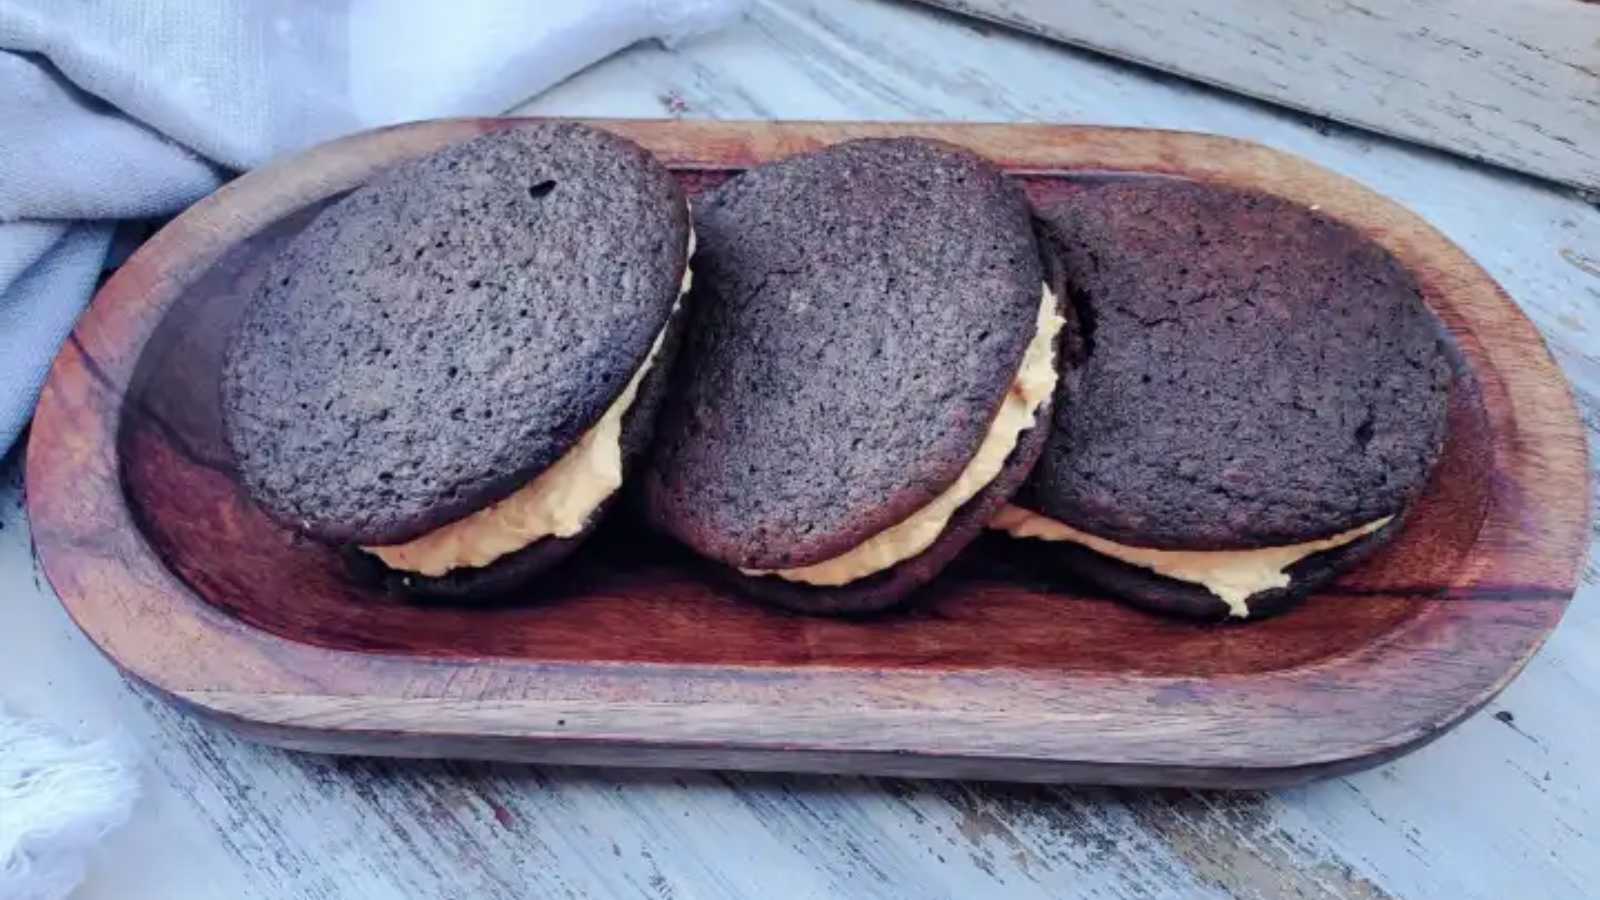 A chocolate whoopie pie is on the top of a wooden bowl.